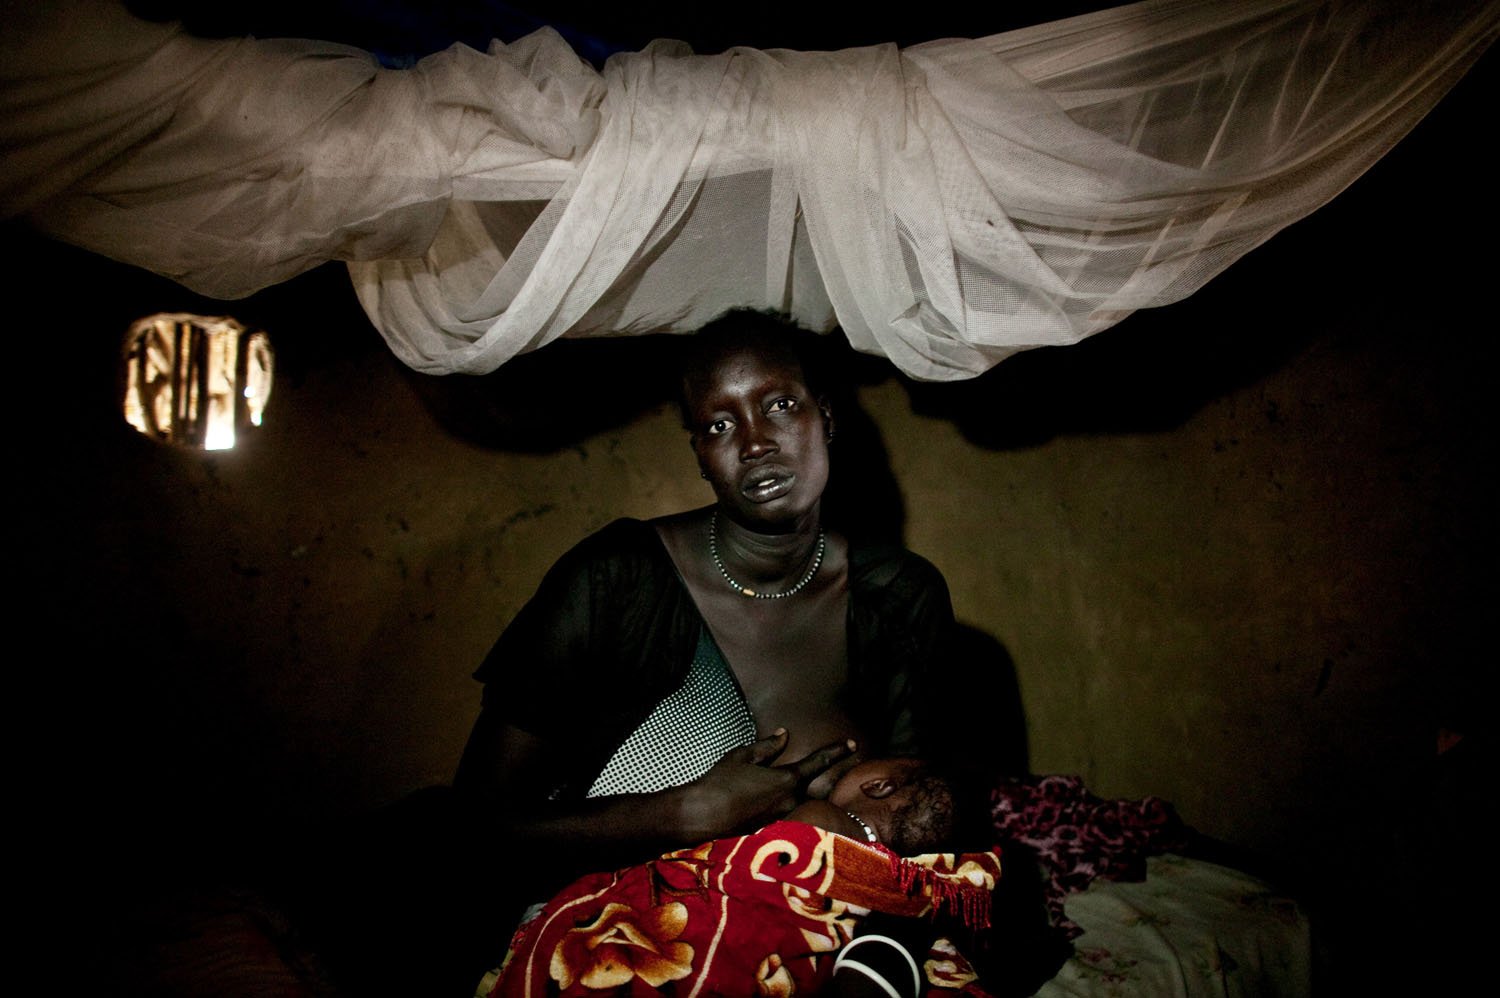  A survivor of a recent massacre in Fangak, southern Sudan on Thursday, April 7, 2011. The massacre occurred when forces loyal to rebel General George Athor attacked the to town of Fangak on Feb 9th and 10th, 2011. When the fighting ended, more than 